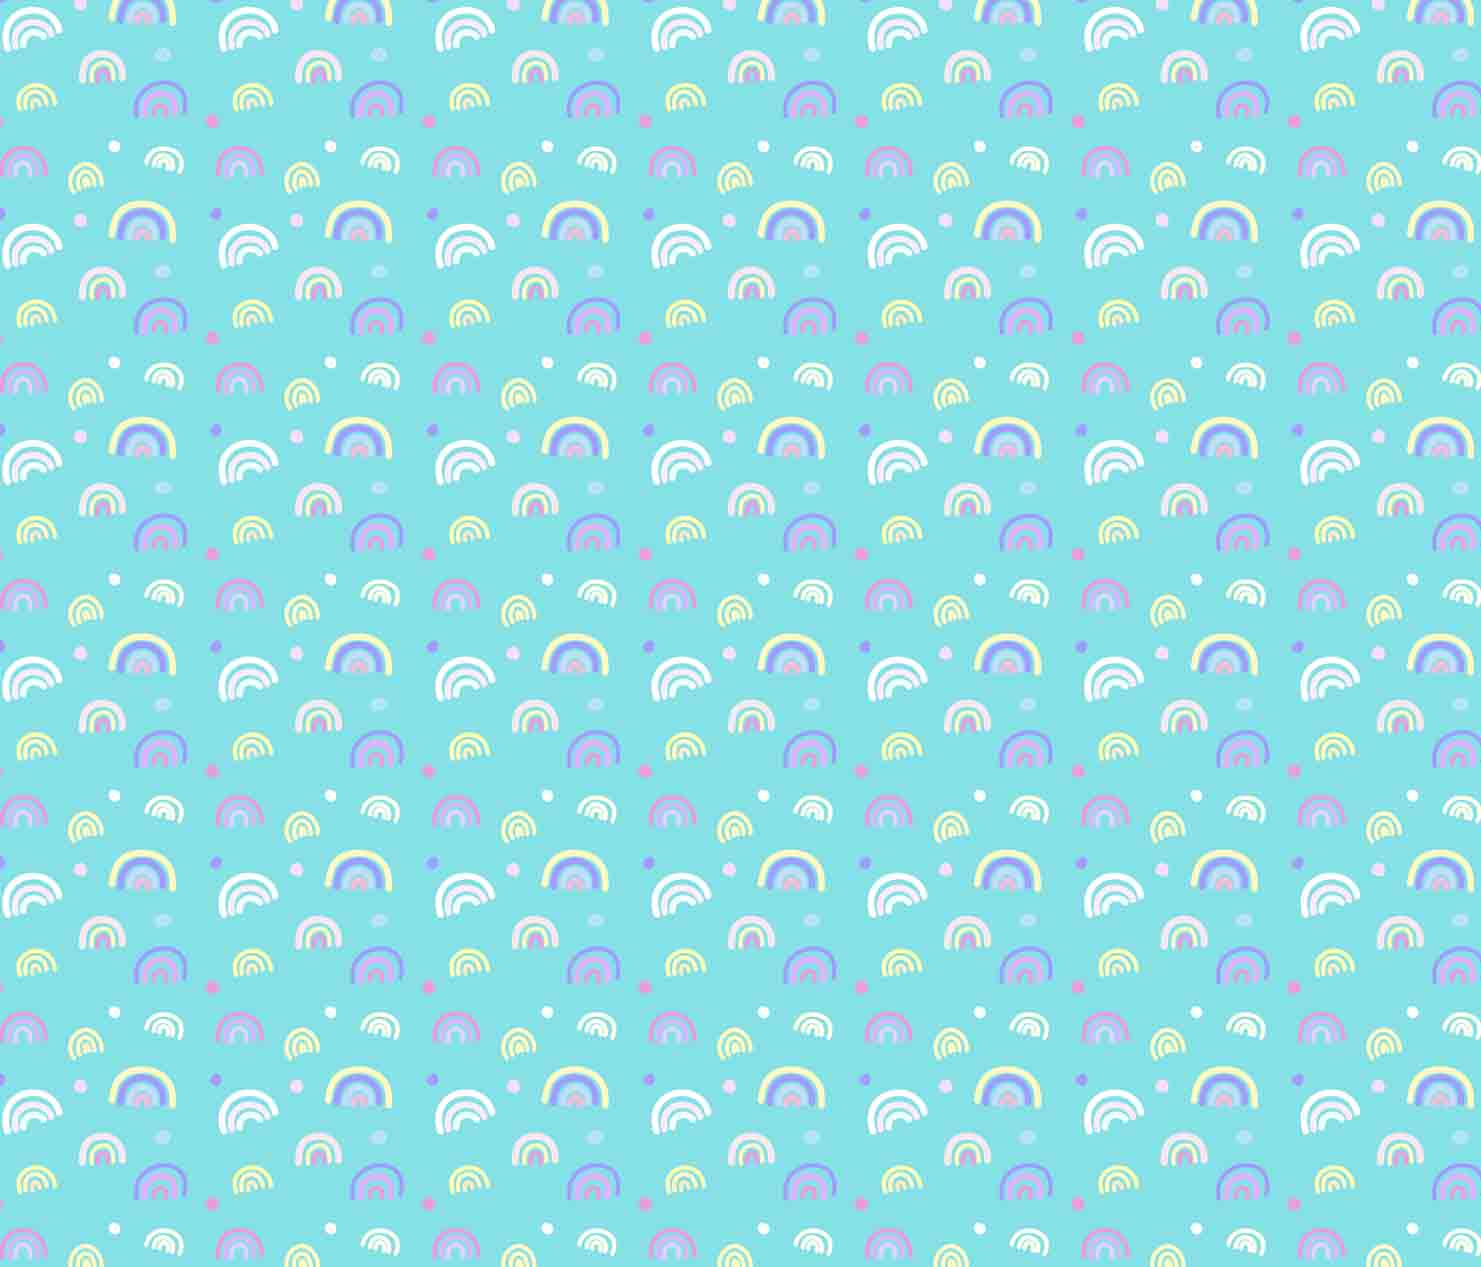 Small Multiple Rainbows Motifs for kids Room Wallpapers